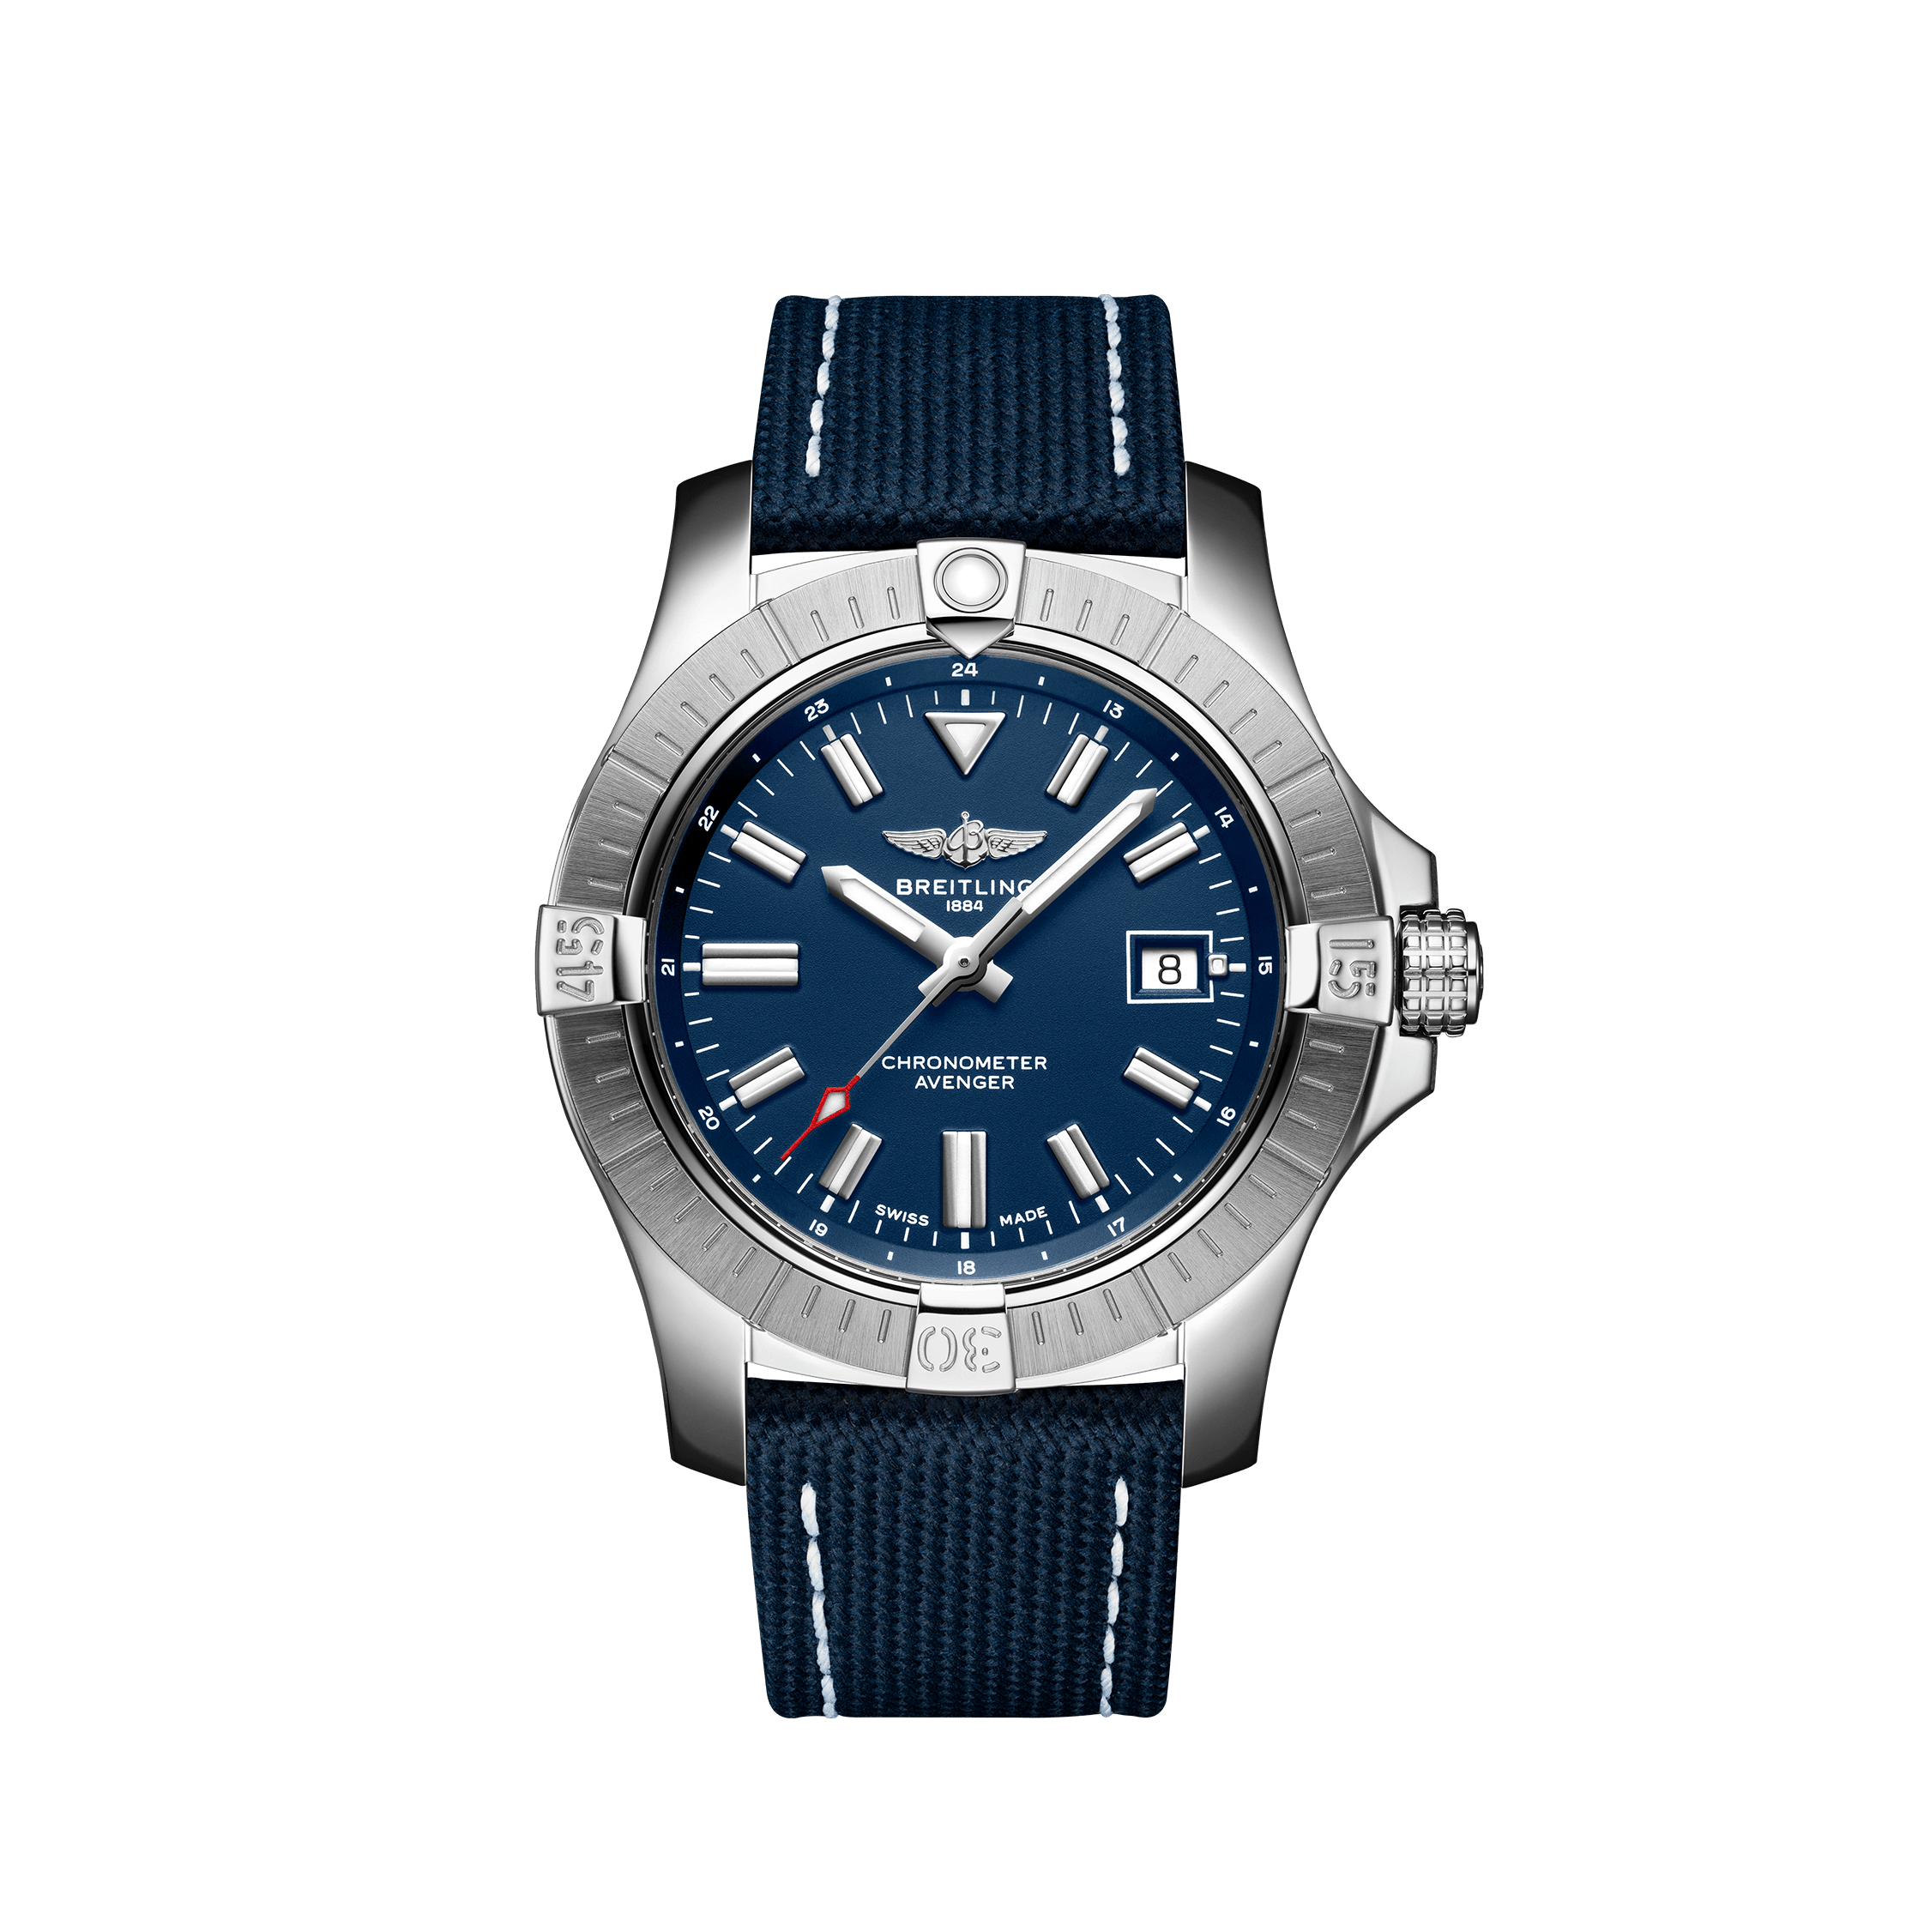 Avenger Automatic 43, Stainless steel - Blue
Bold, extremely robust and shock resistant, the Avenger Automatic 43 features a clean dial offering optimal legibility. As a true Breitling Avenger, it can be used wearing gloves and offers unrivalled safety and reliability to any airborne adventurer.